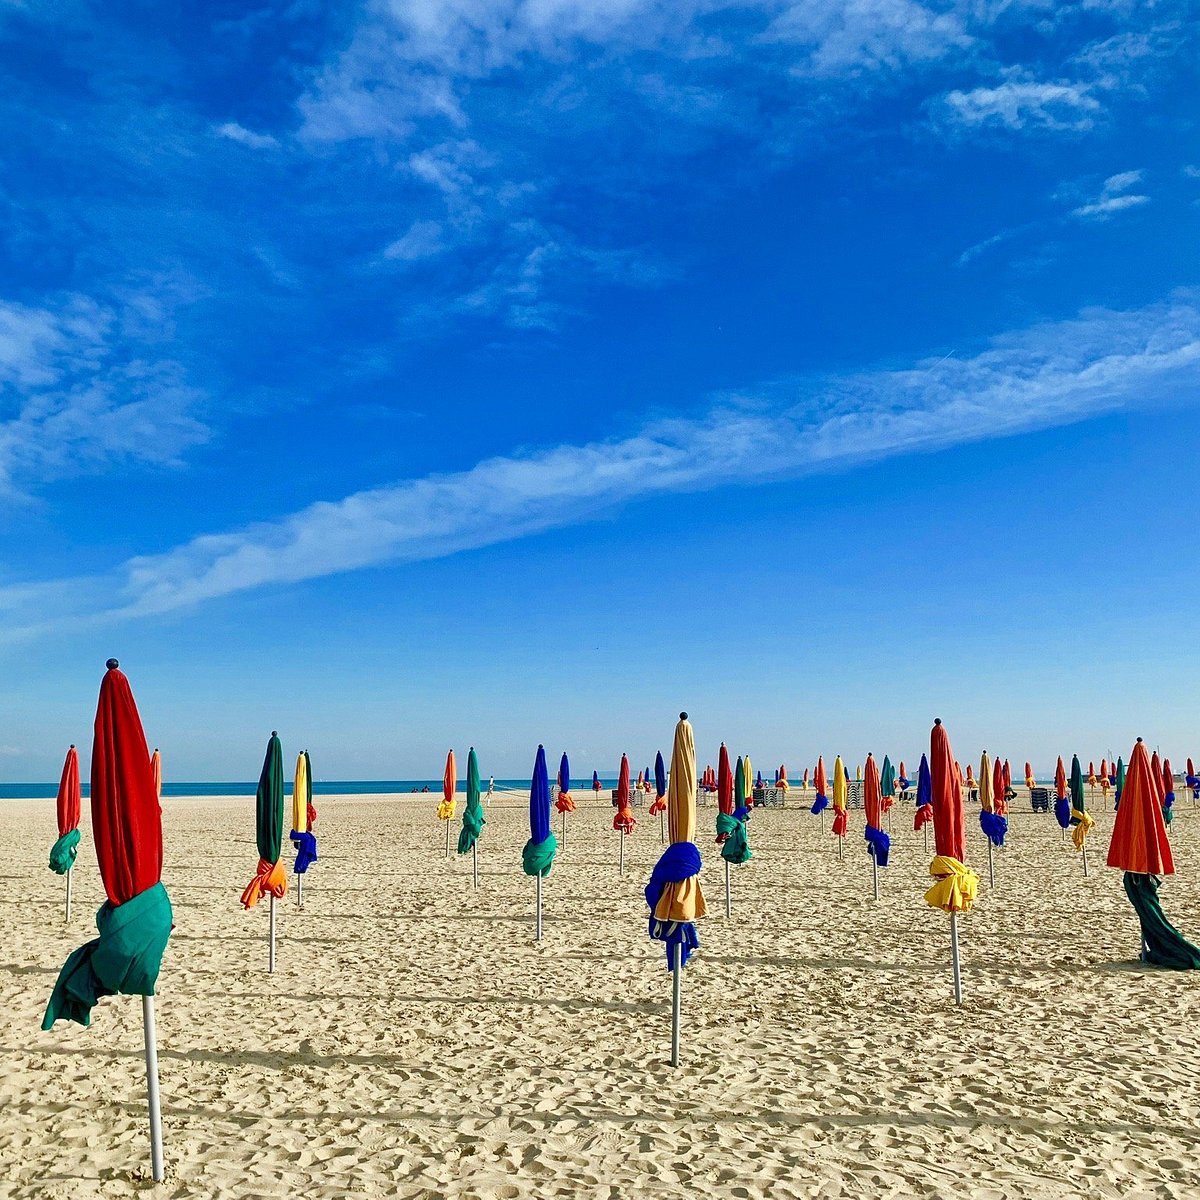  Deauville  strand - Normandy